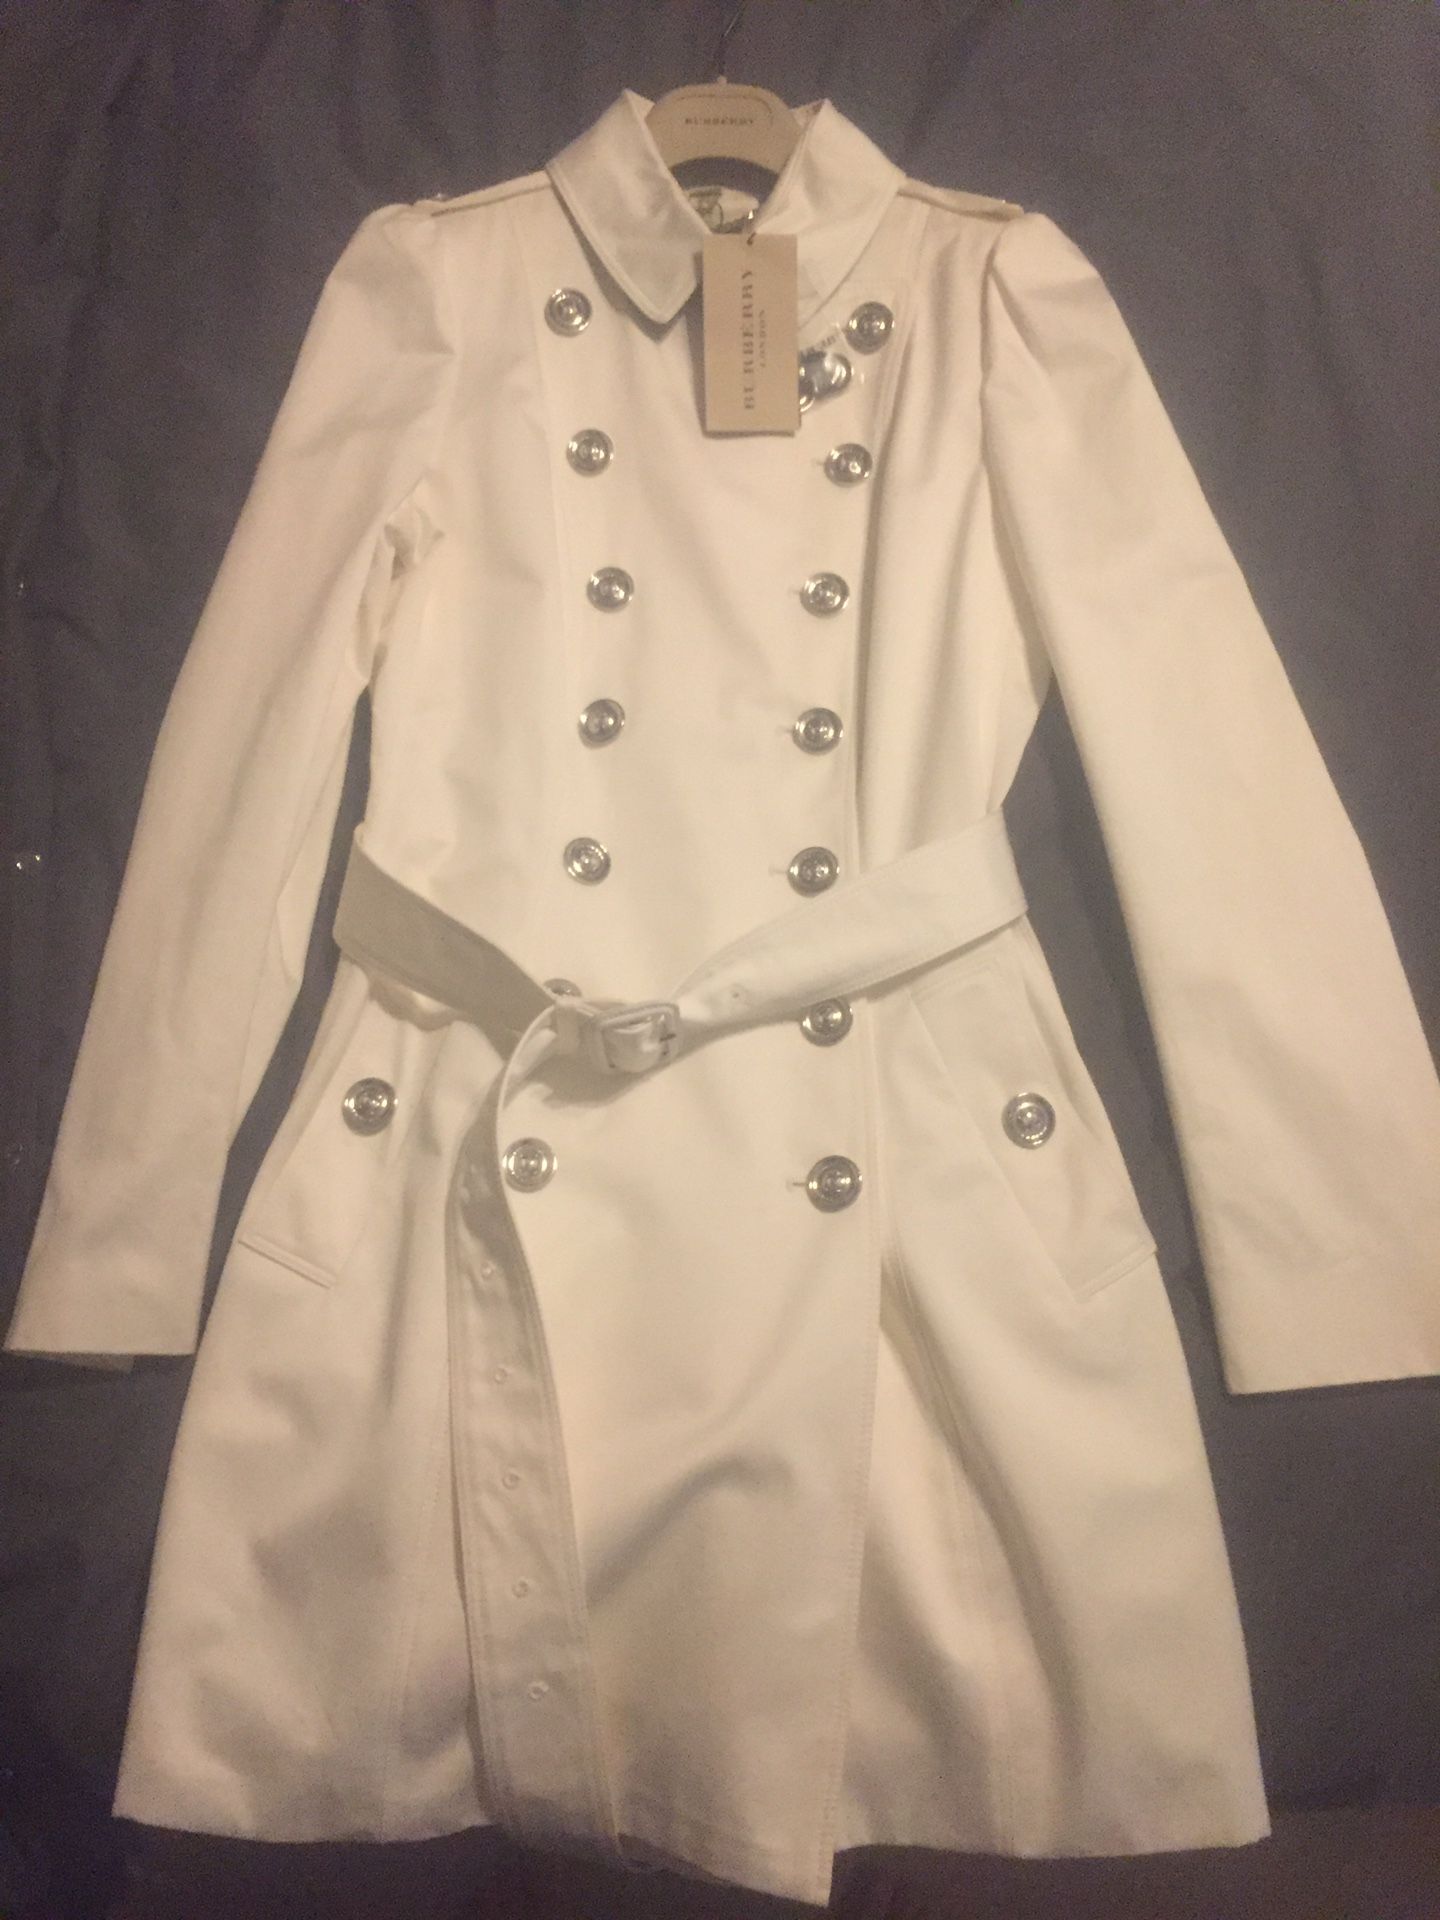 Burberry ladies coat!!!! Size in picture on tag